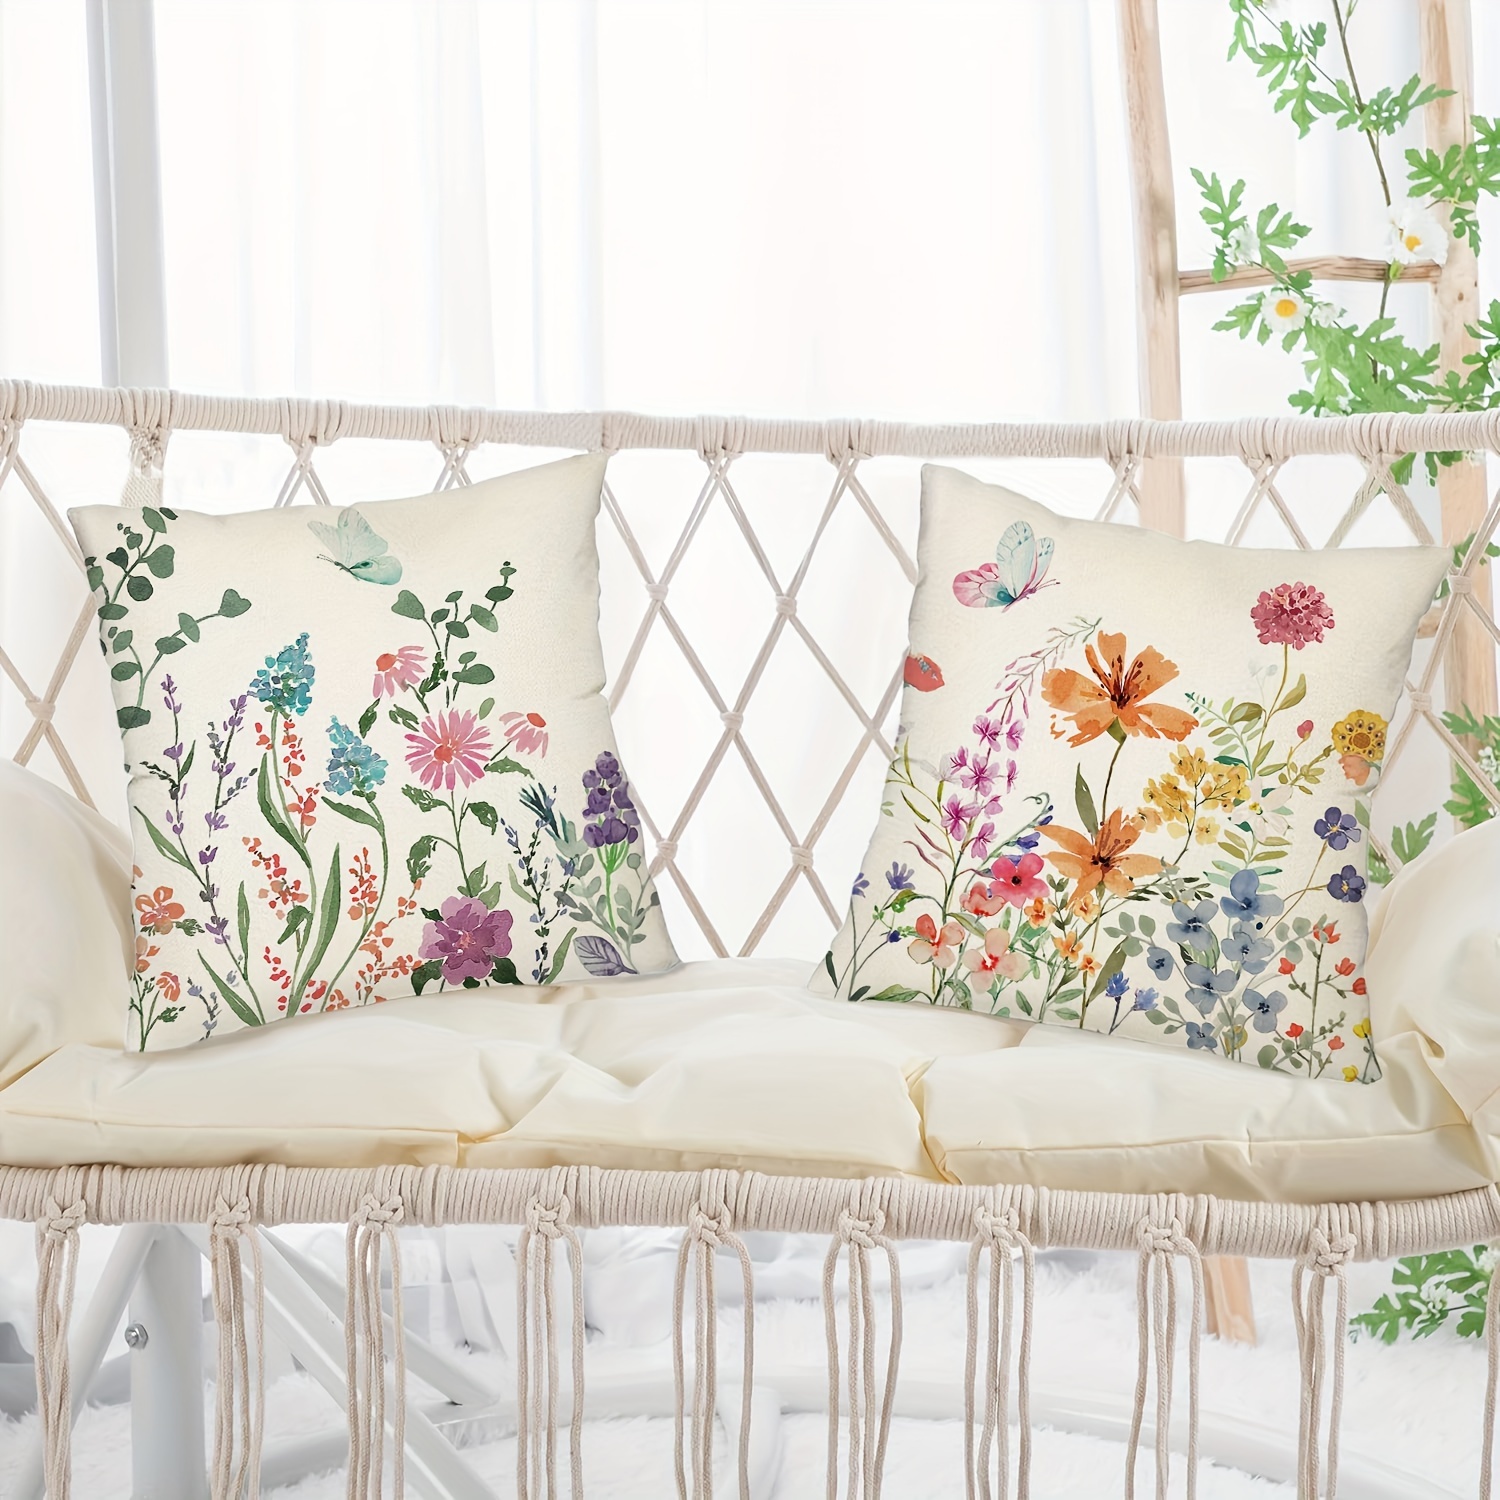 

2pcs Botanical Wildflowers Throw Pillow Covers, 17.7*17.7inch Farmhouse Spring Summer Floral Plant Decorative Cuchion Cases For Porch Patio Couch Sofa Living Room Outdoor, Without Pillow Inserts